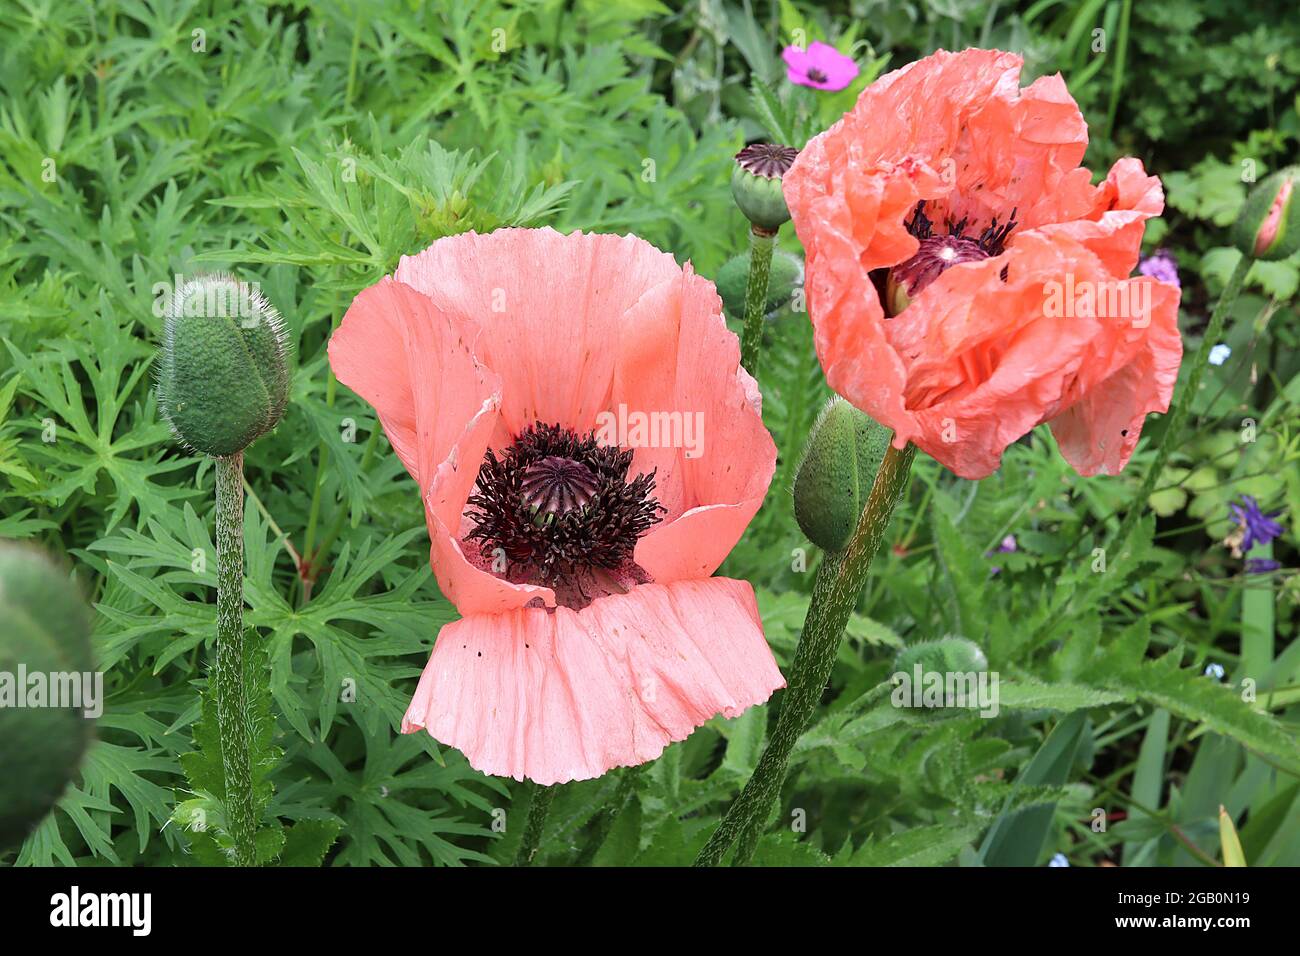 Papaver orientale ‘Coral Reef’ oriental poppy Coral Reef - large coral pink poppies with creased petals on tall stems,  June, England, UK Stock Photo